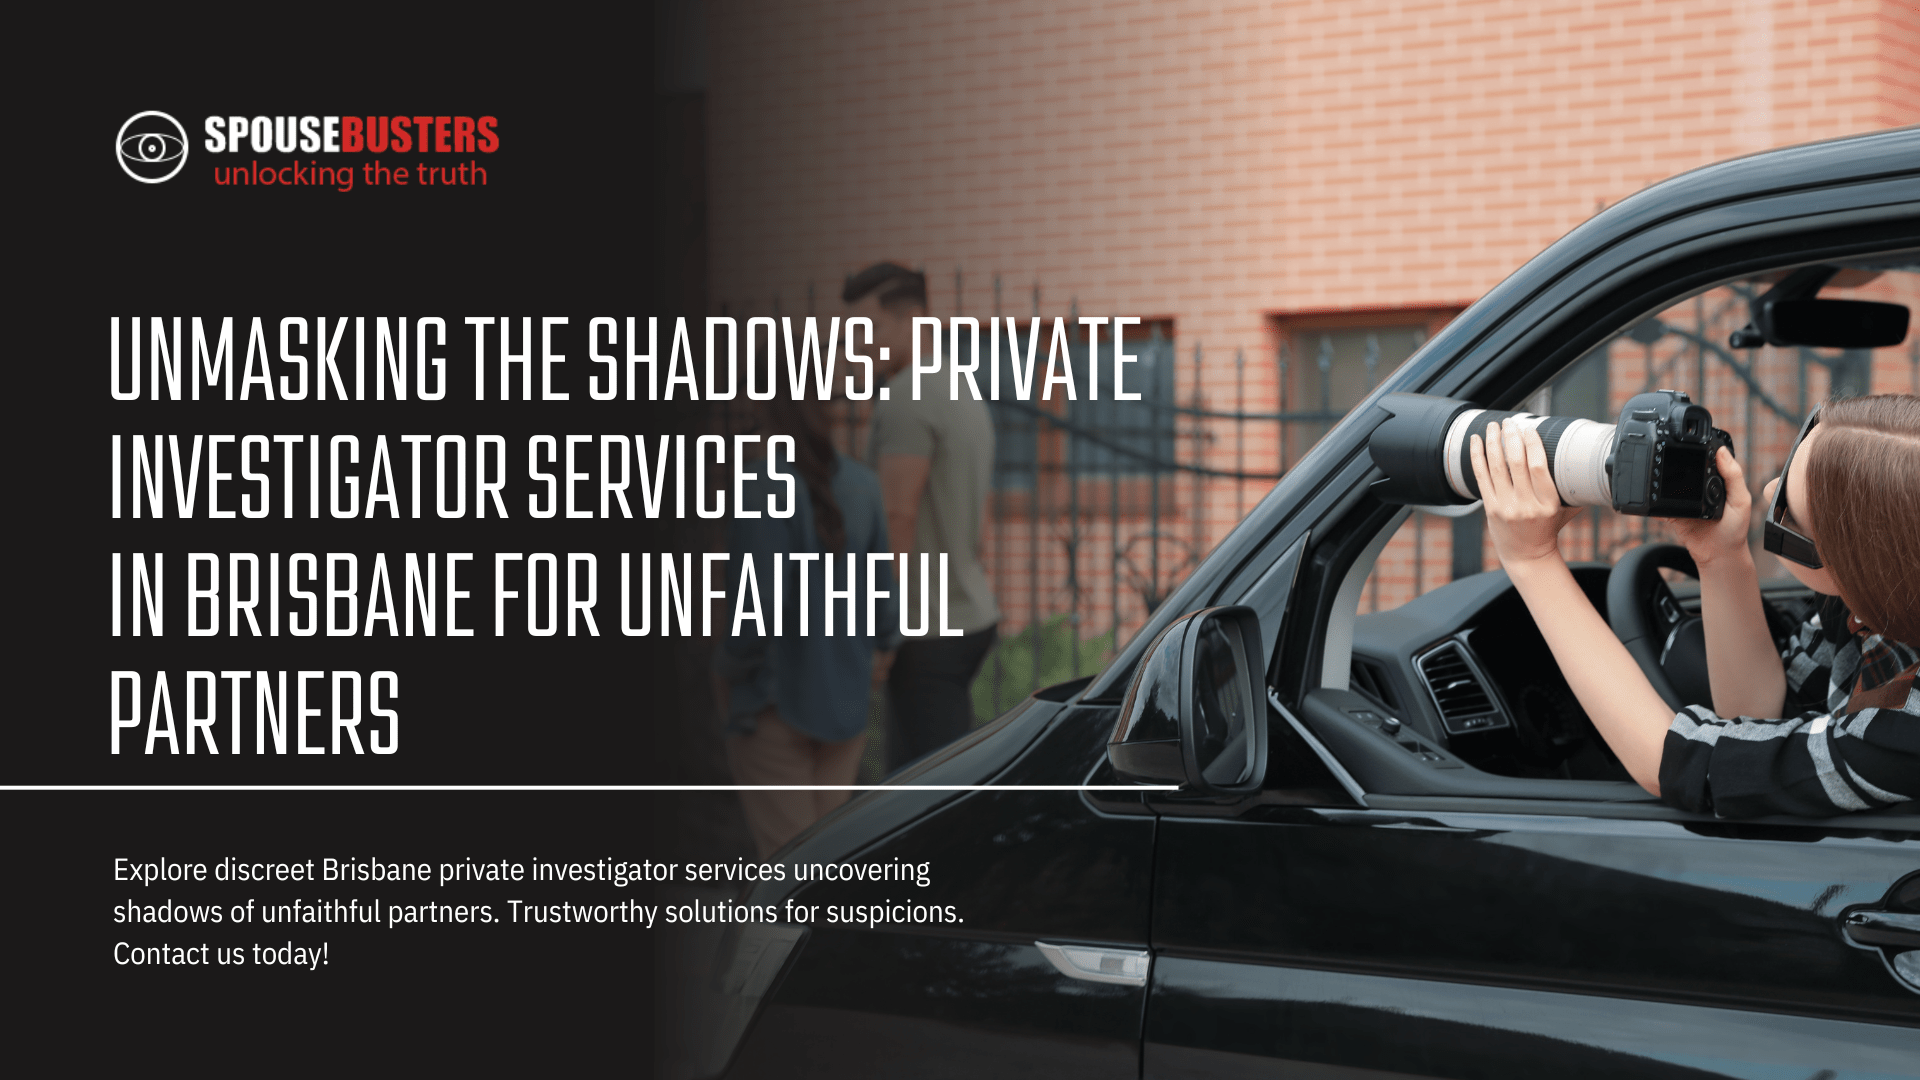 Unmasking the Shadows: Private Investigator Services in Brisbane for Unfaithful Partners